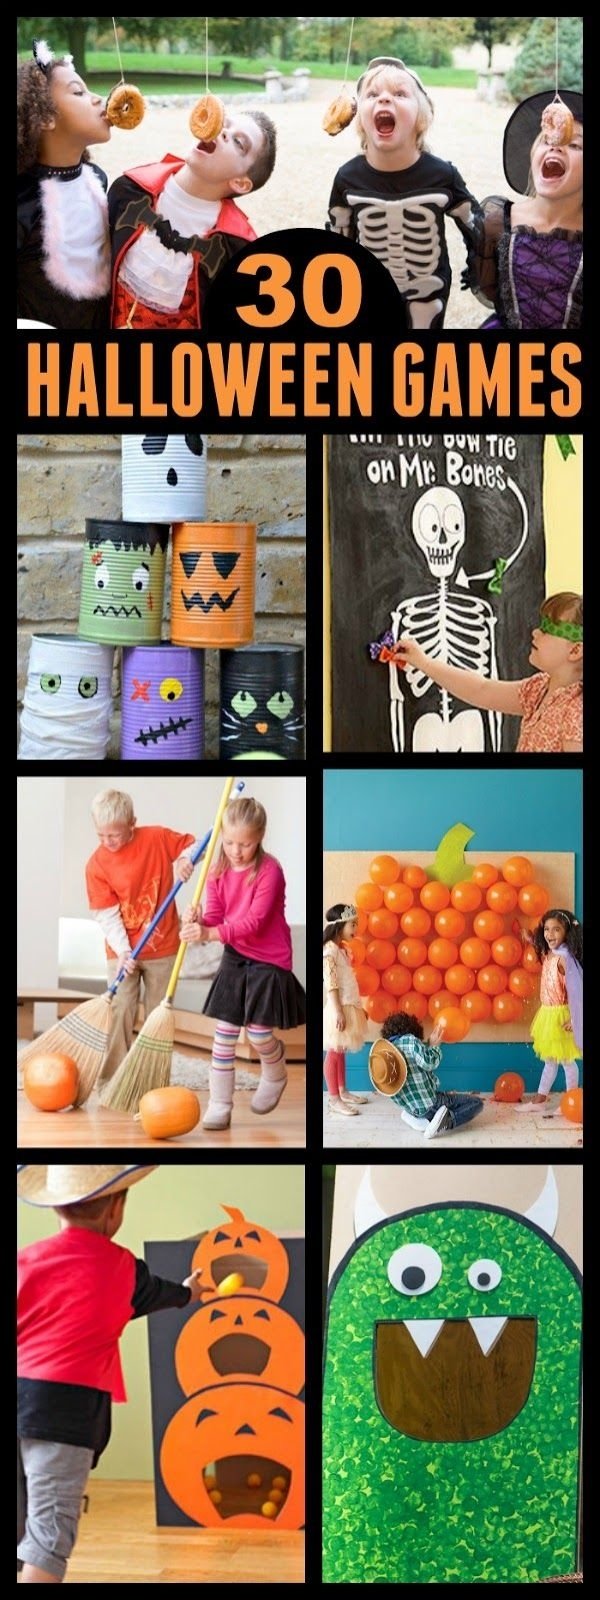 10 Elegant Halloween Game Ideas For Adults halloween games for kids halloween games game ideas and 30th 6 2023